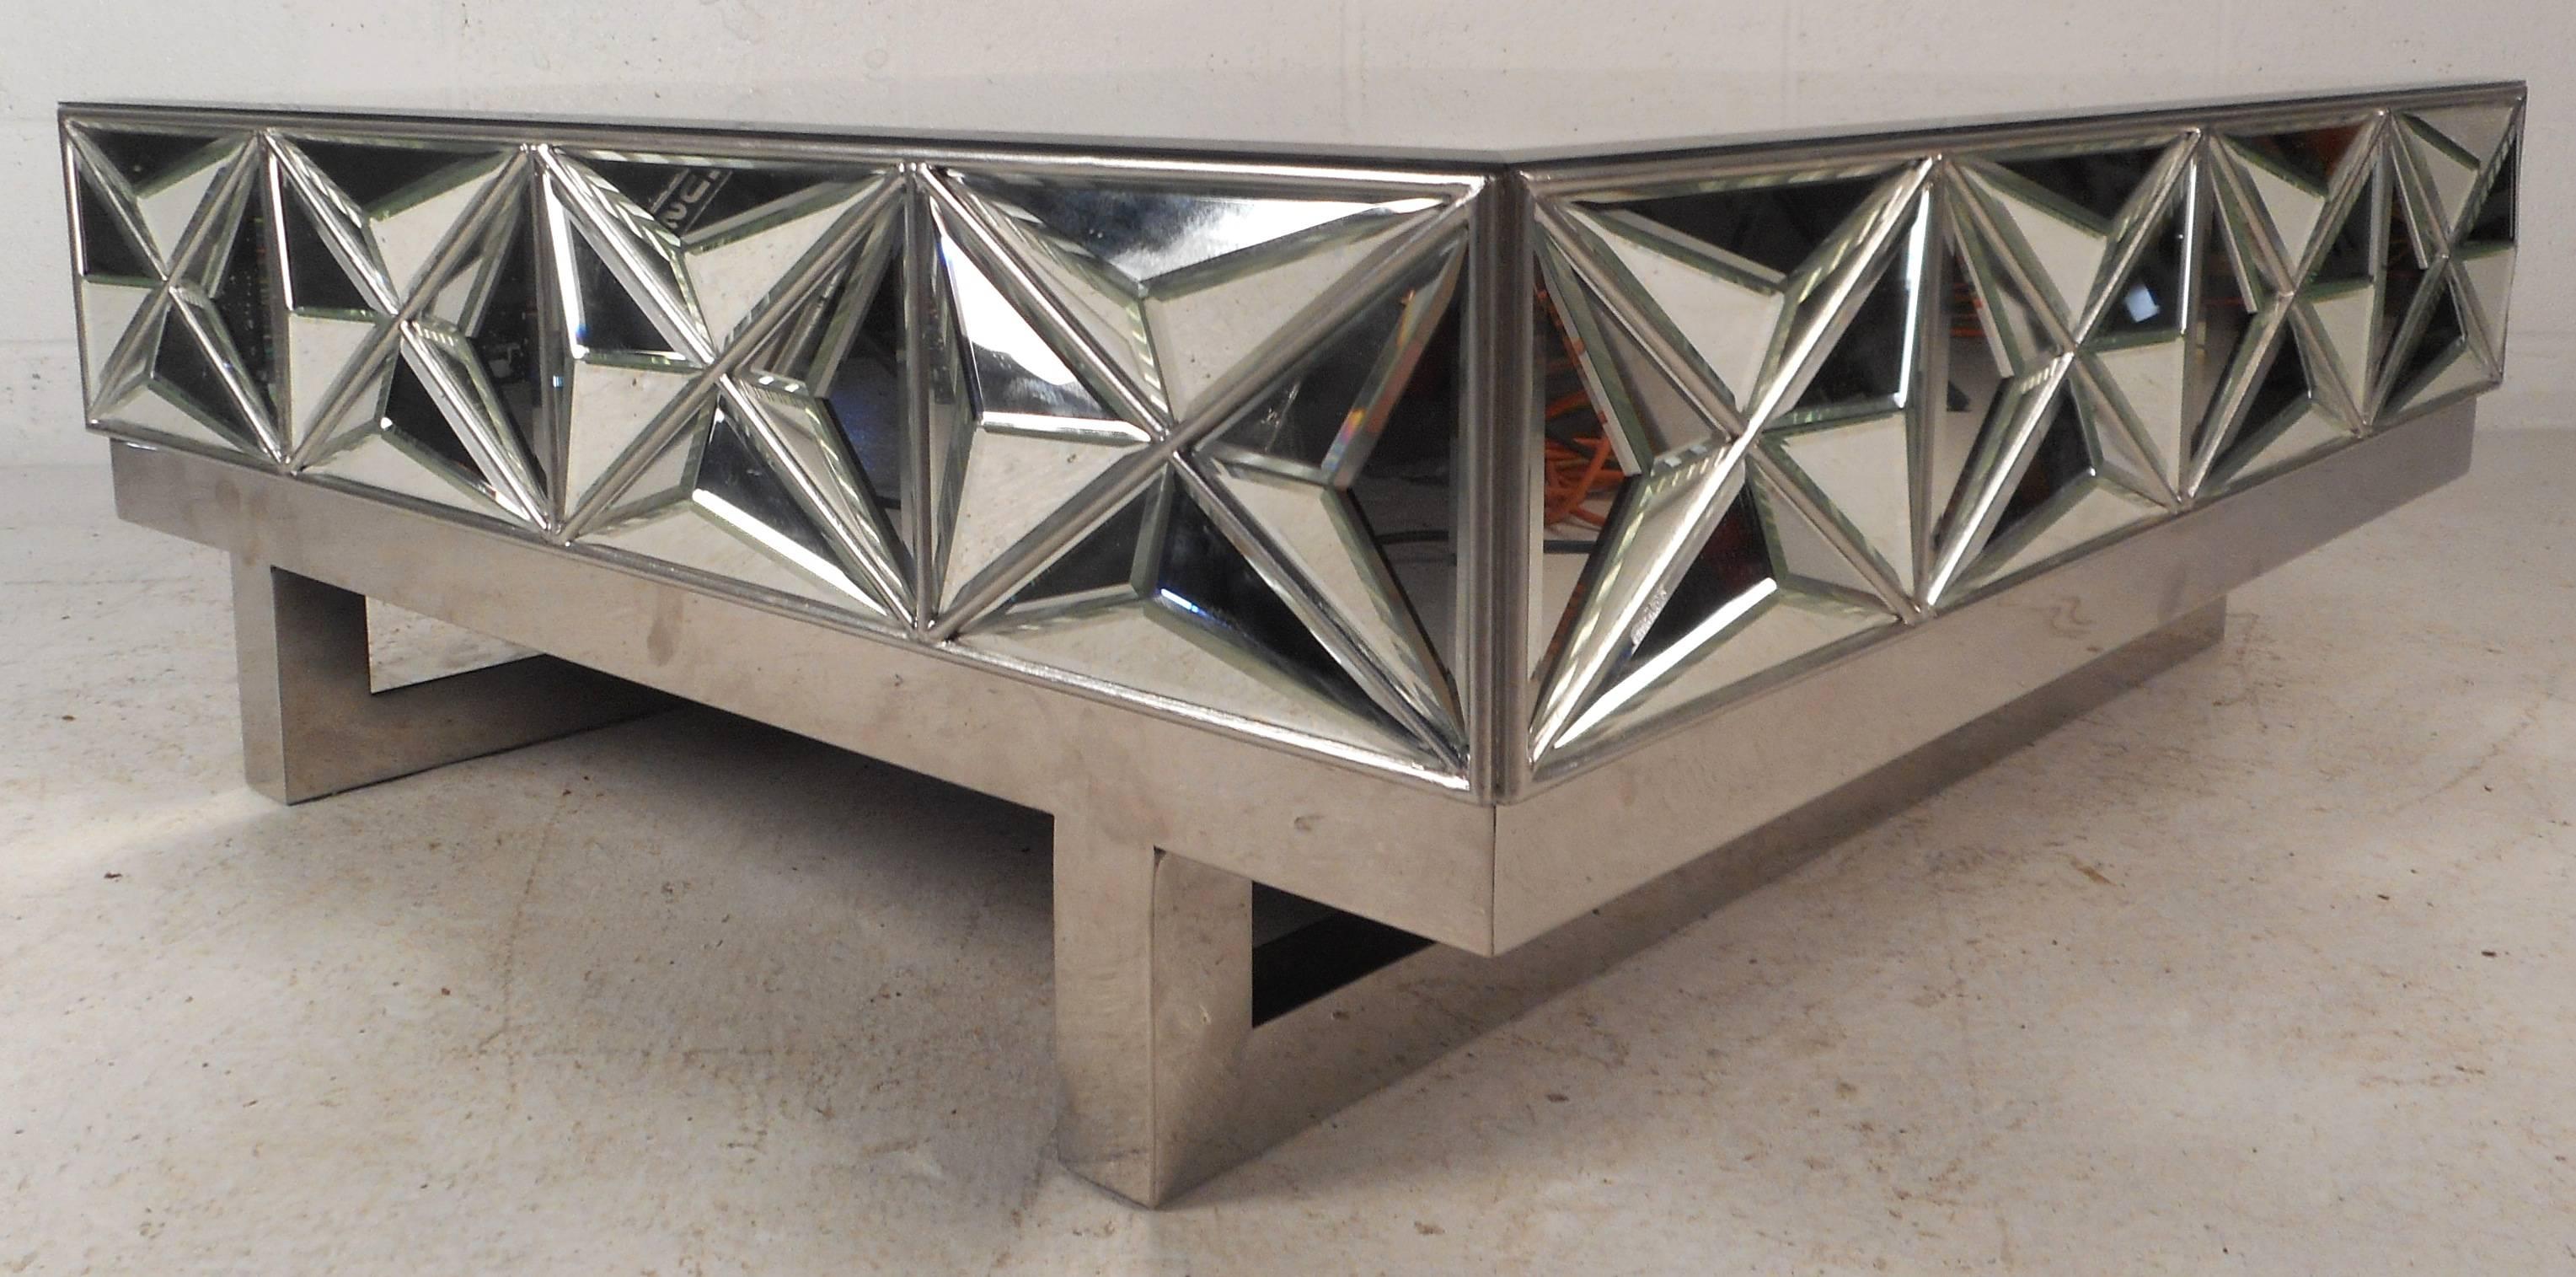 This elegant Mid-Century Modern style coffee table features a beveled mirror top with a stylish sled leg chrome base. Unique beveled diamond designs wraparound all sides of this unusual vintage modern piece. Elaborate and functional design makes the